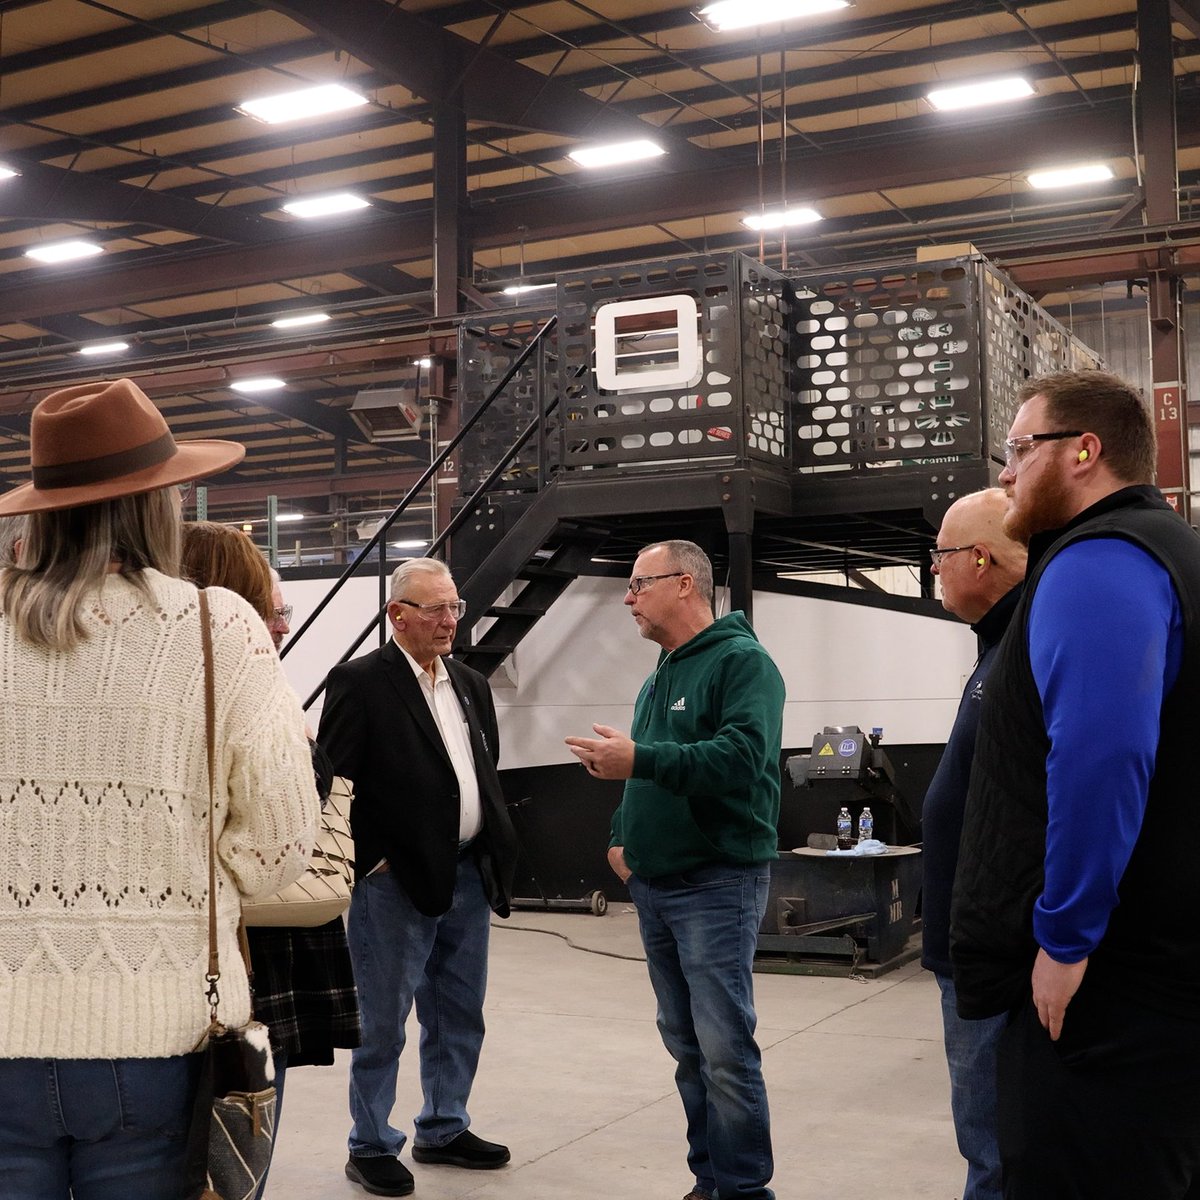 Tank Connection had the privilege of welcoming Parsons Chamber members on Friday to enjoy our Chamber Coffee. Guests enjoyed hand pies from the Cake Shed and coffee. After coffee, members were given a tour of Tank Connection Headquarters. Thank you to everyone who came to visit!